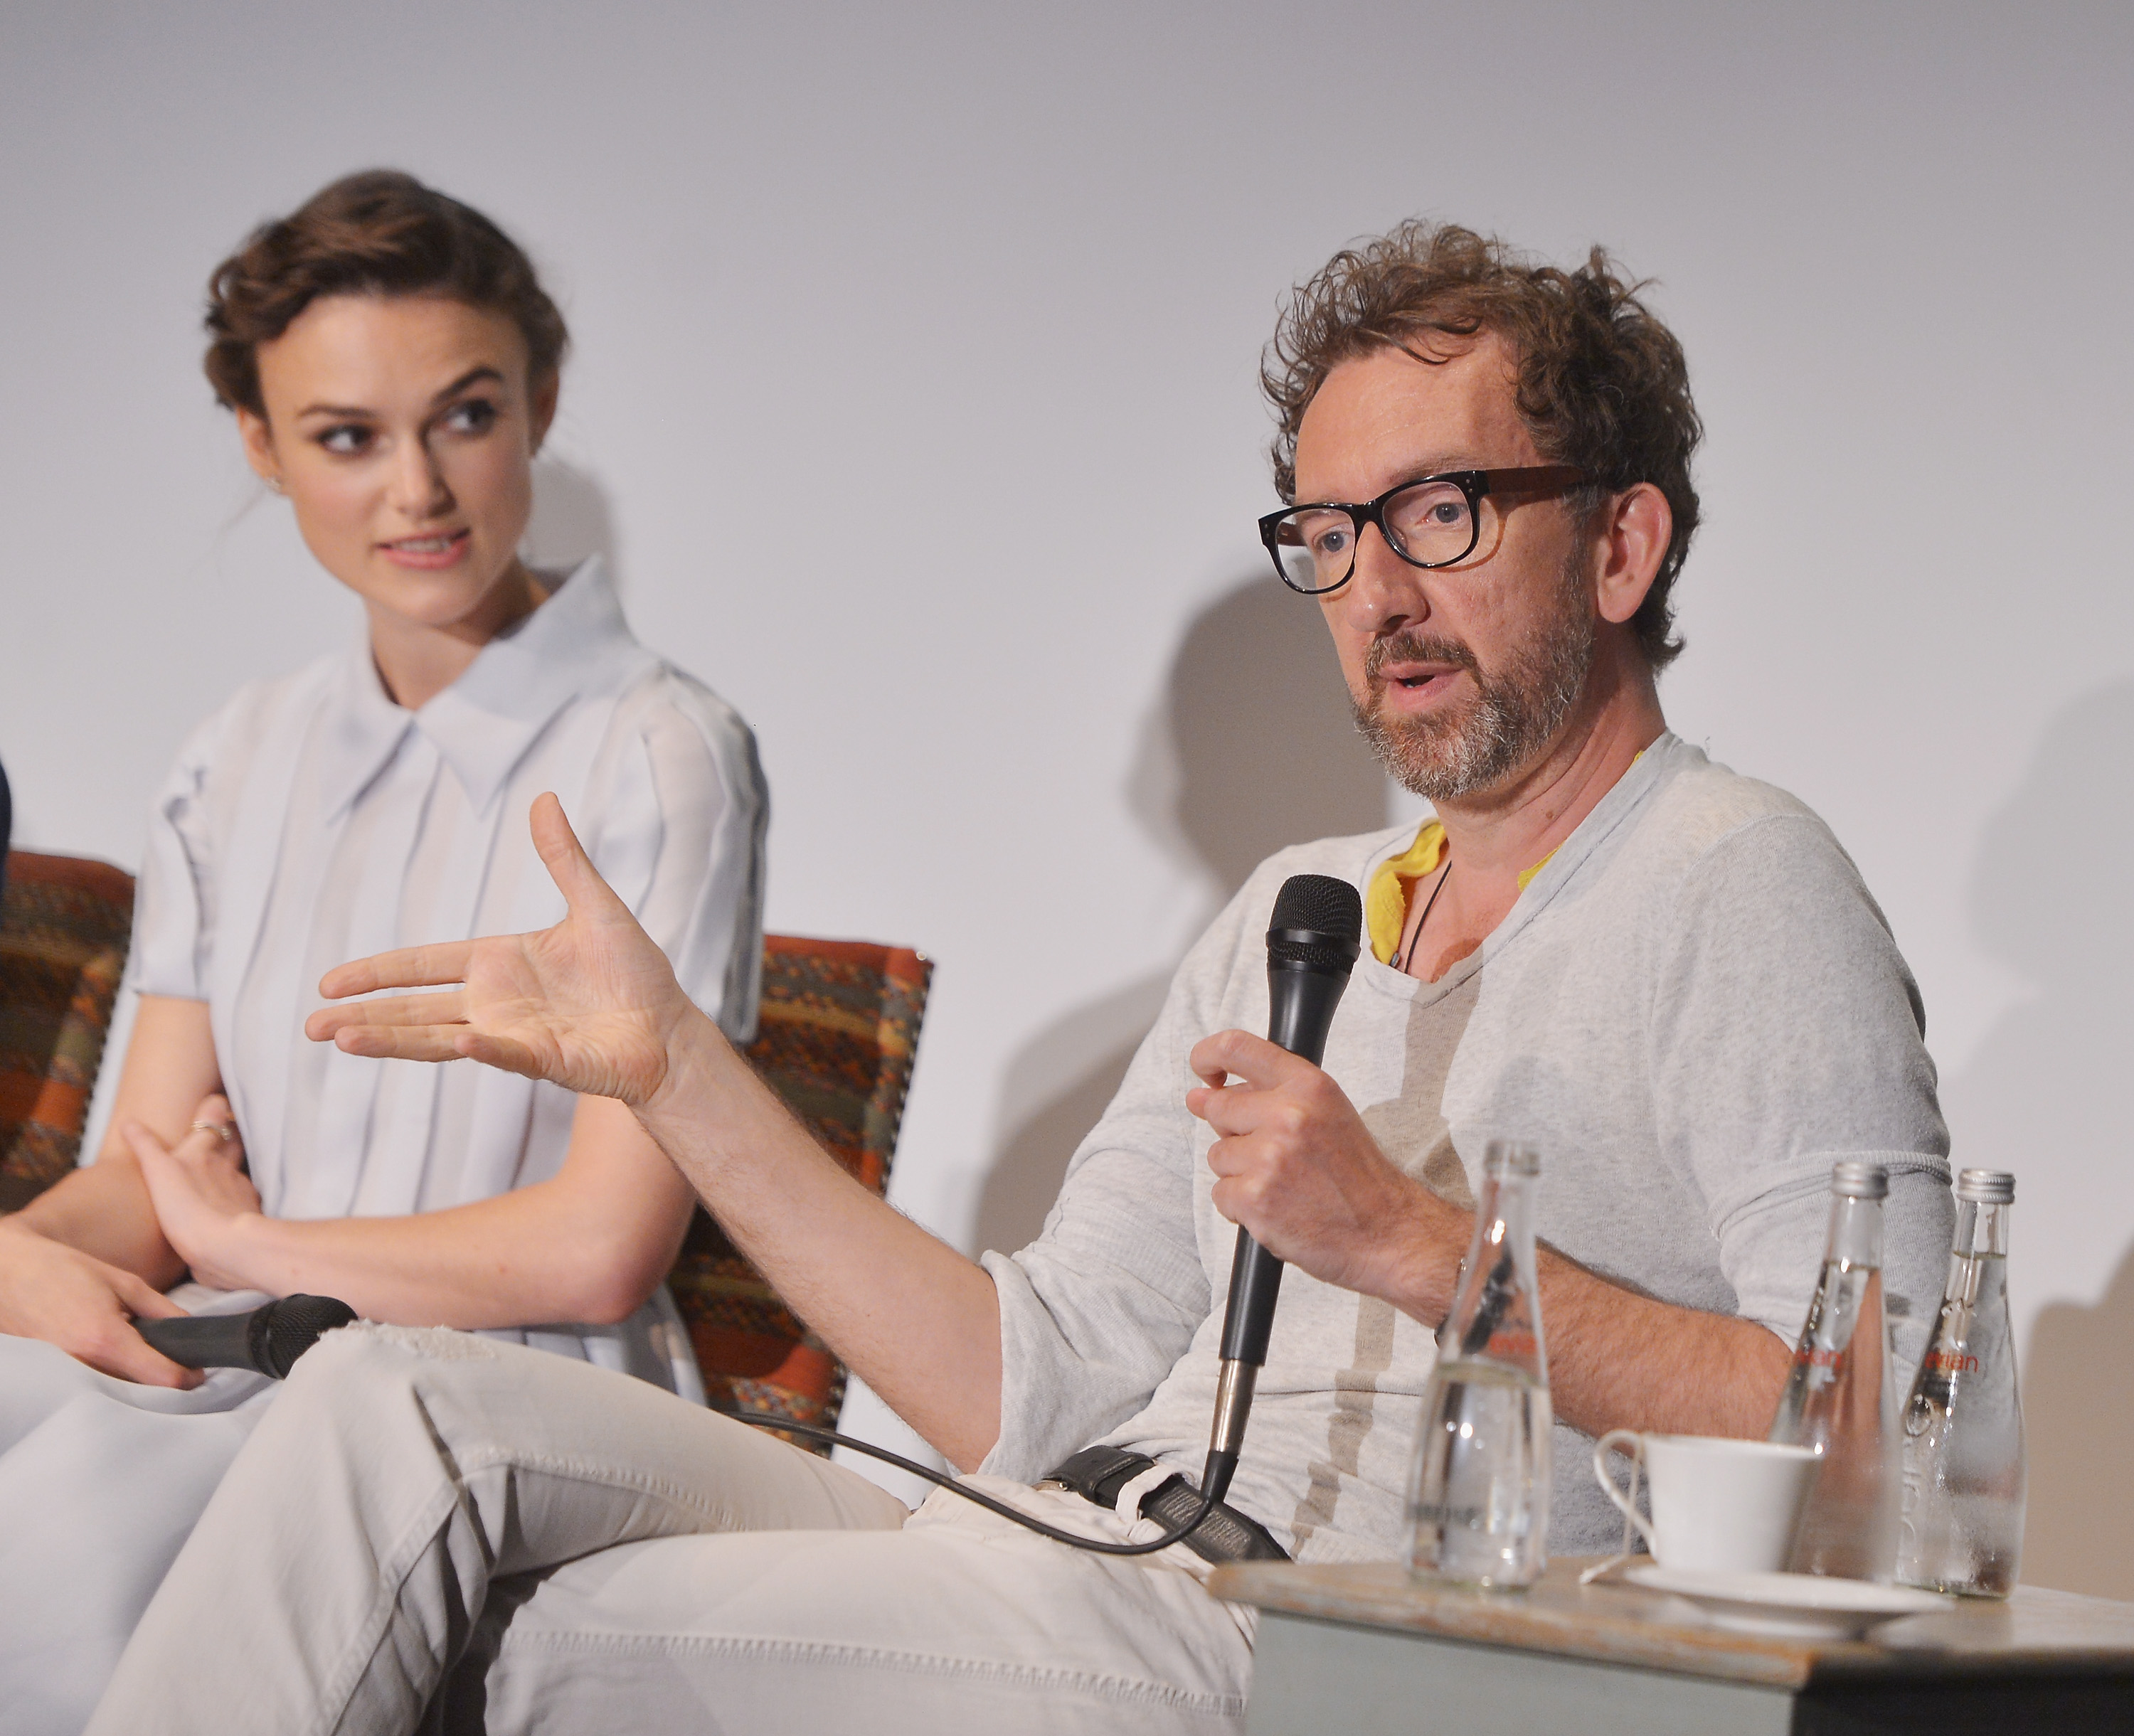 Actress Keira Knightley and writer/director John Carney attend the 'Begin Again' press conference at Crosby Street Hotel on June 26, 2014 in New York City. (Stephen Lovekin—Getty Images for HBO)